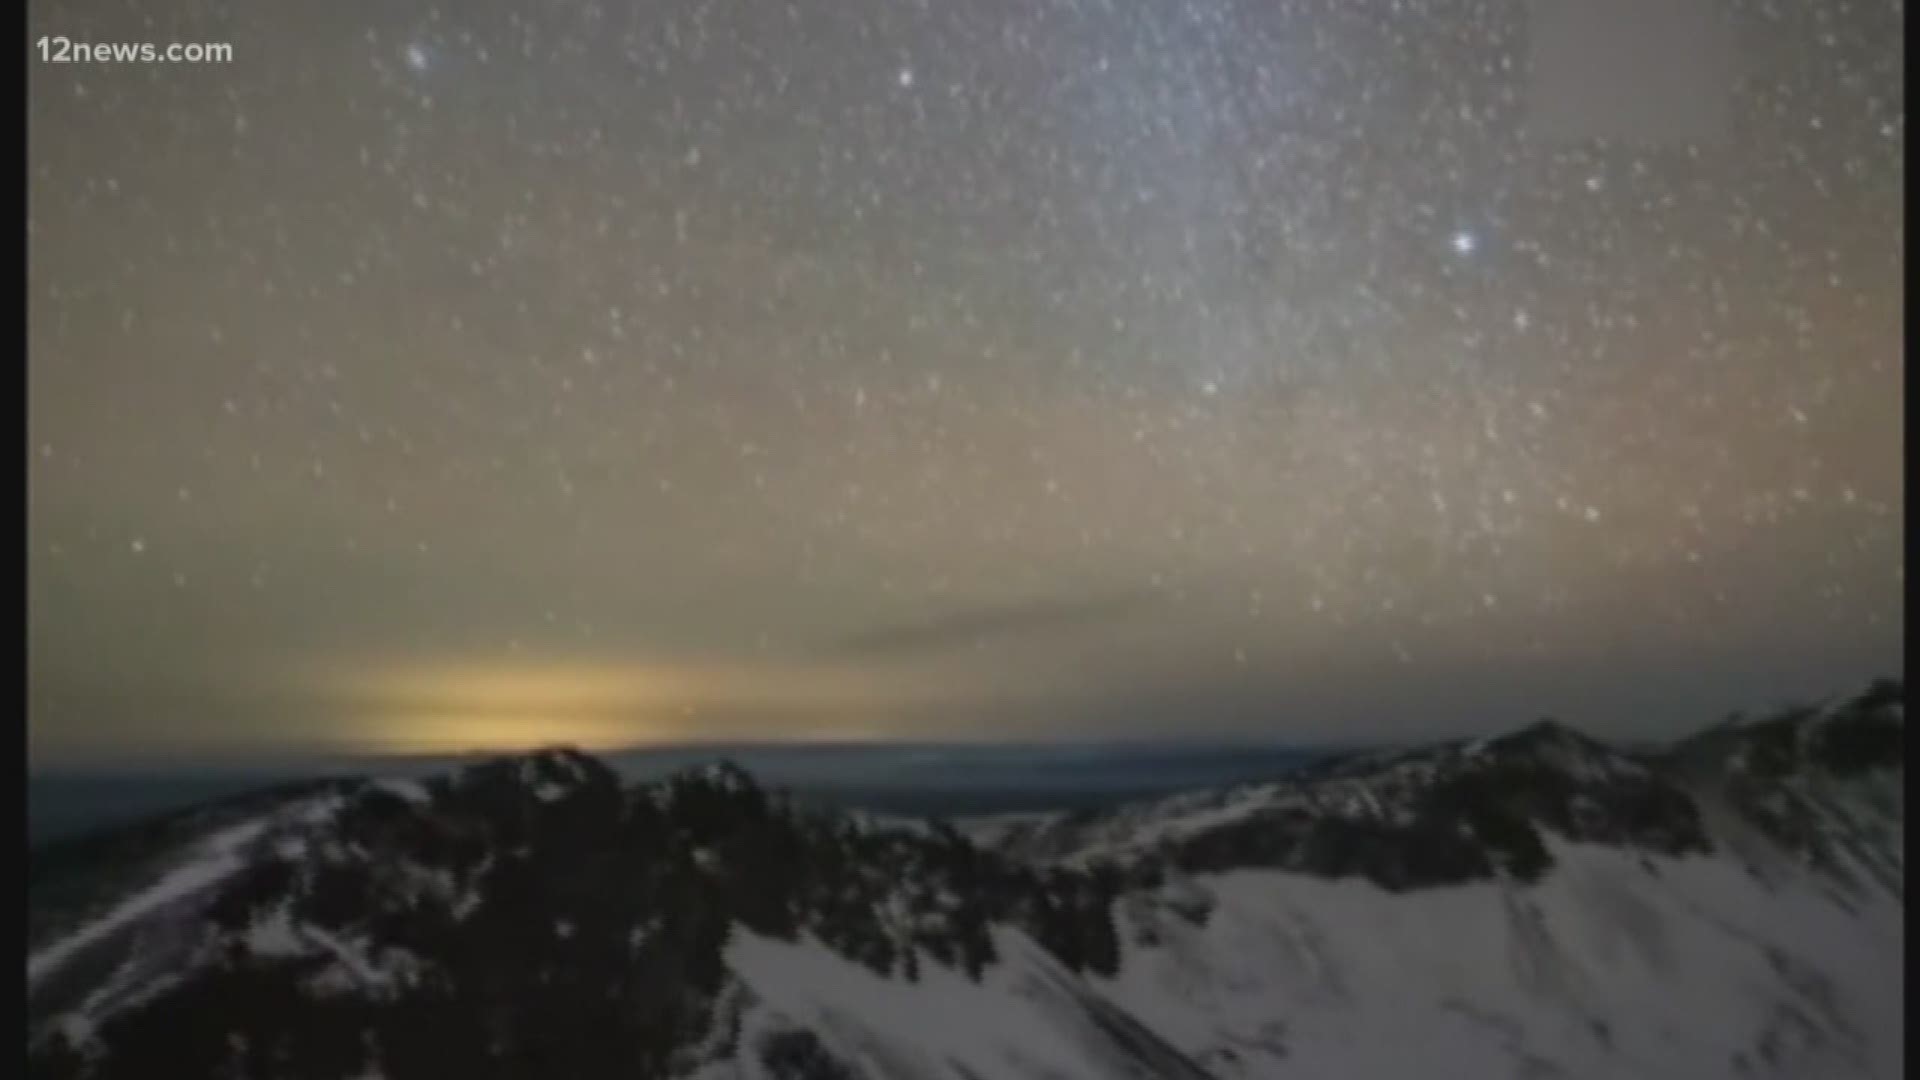 One of the biggest meteor showers of the year is happening over the next two days. We spoke to experts at the Lowell Observatory to get some tips on when and where you can get the best view.